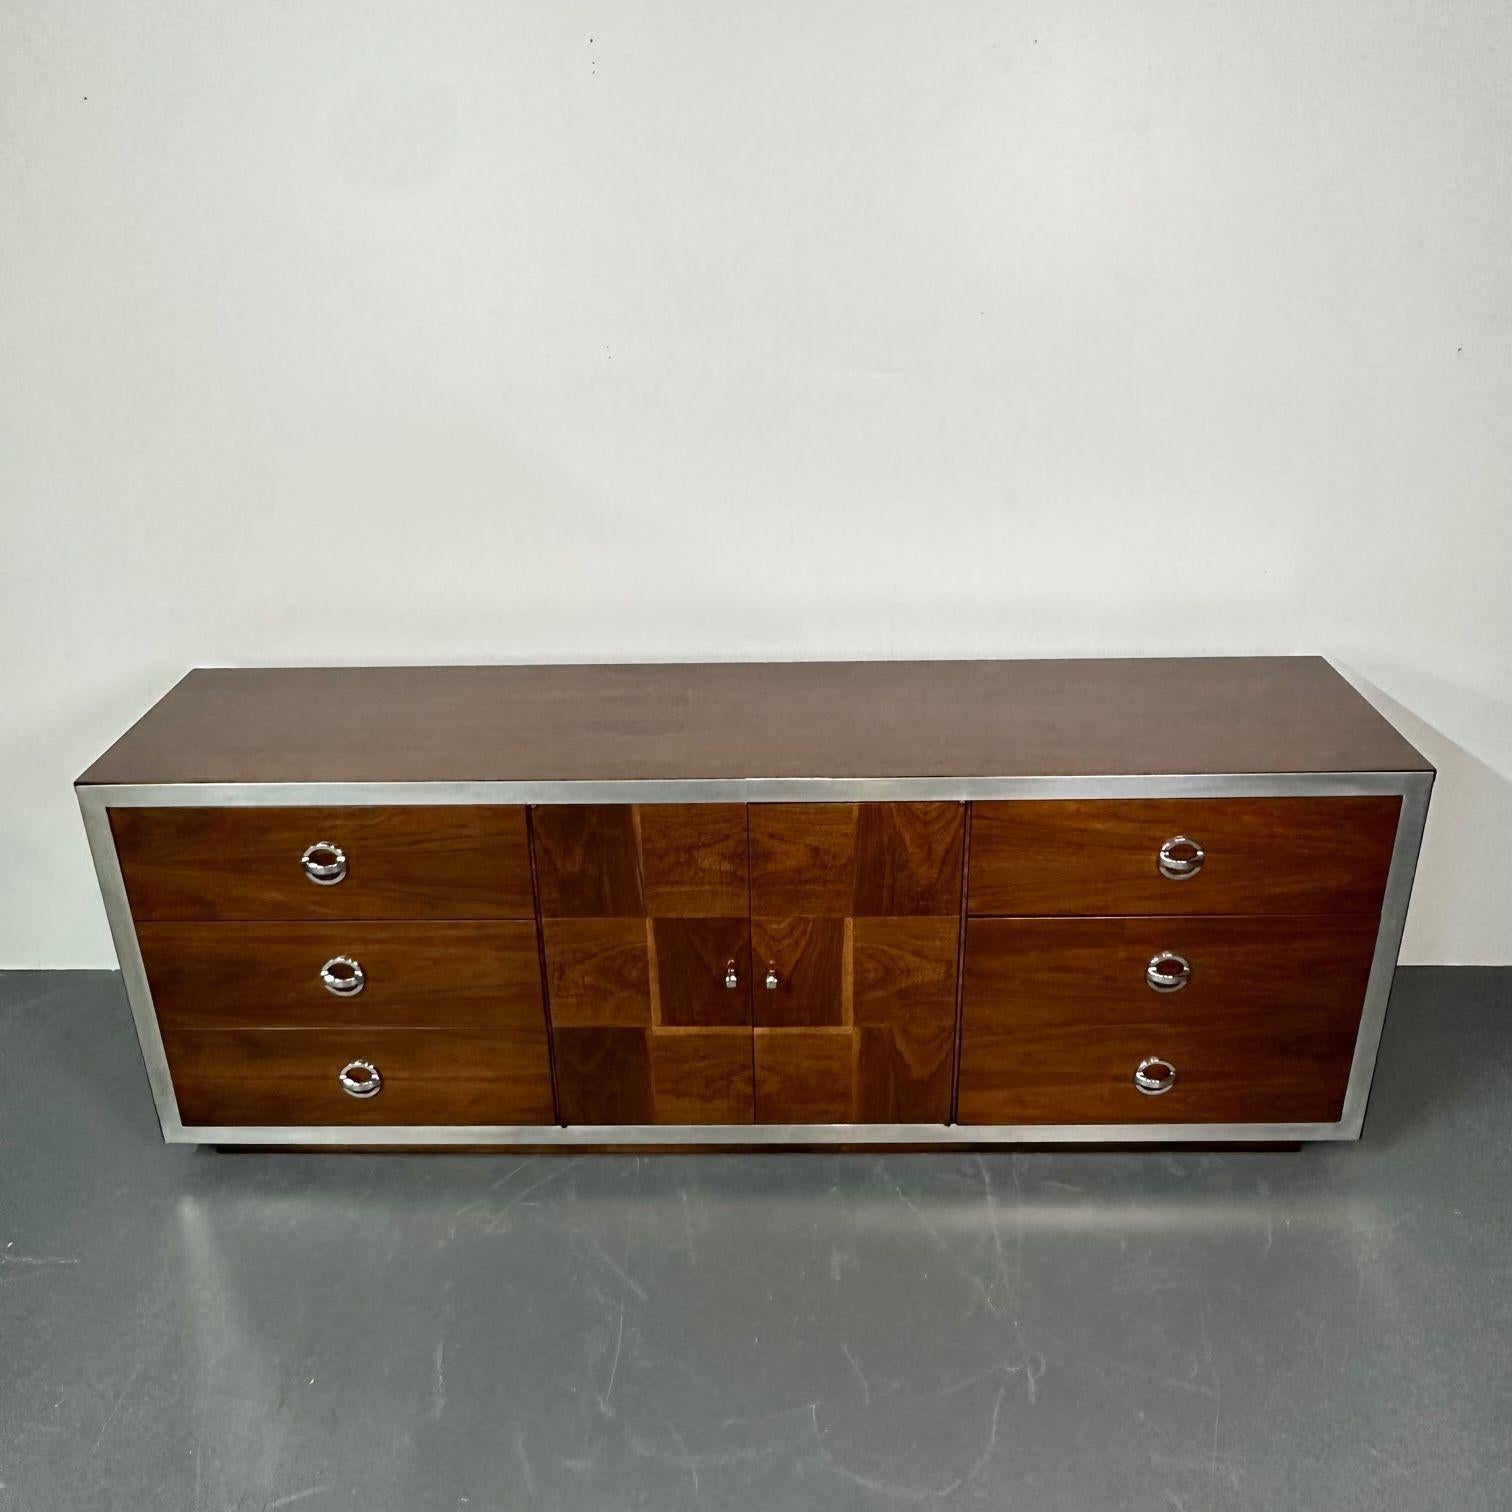 Mid-Century Modern Milo Baughman Sideboard / Dresser, Burlwood, Chrome
Gorgeous mid-century dresser or sideboard designed and produced in the United States, circa 1980s. This piece is made of burlwood with chrome accents and details. Very decorative